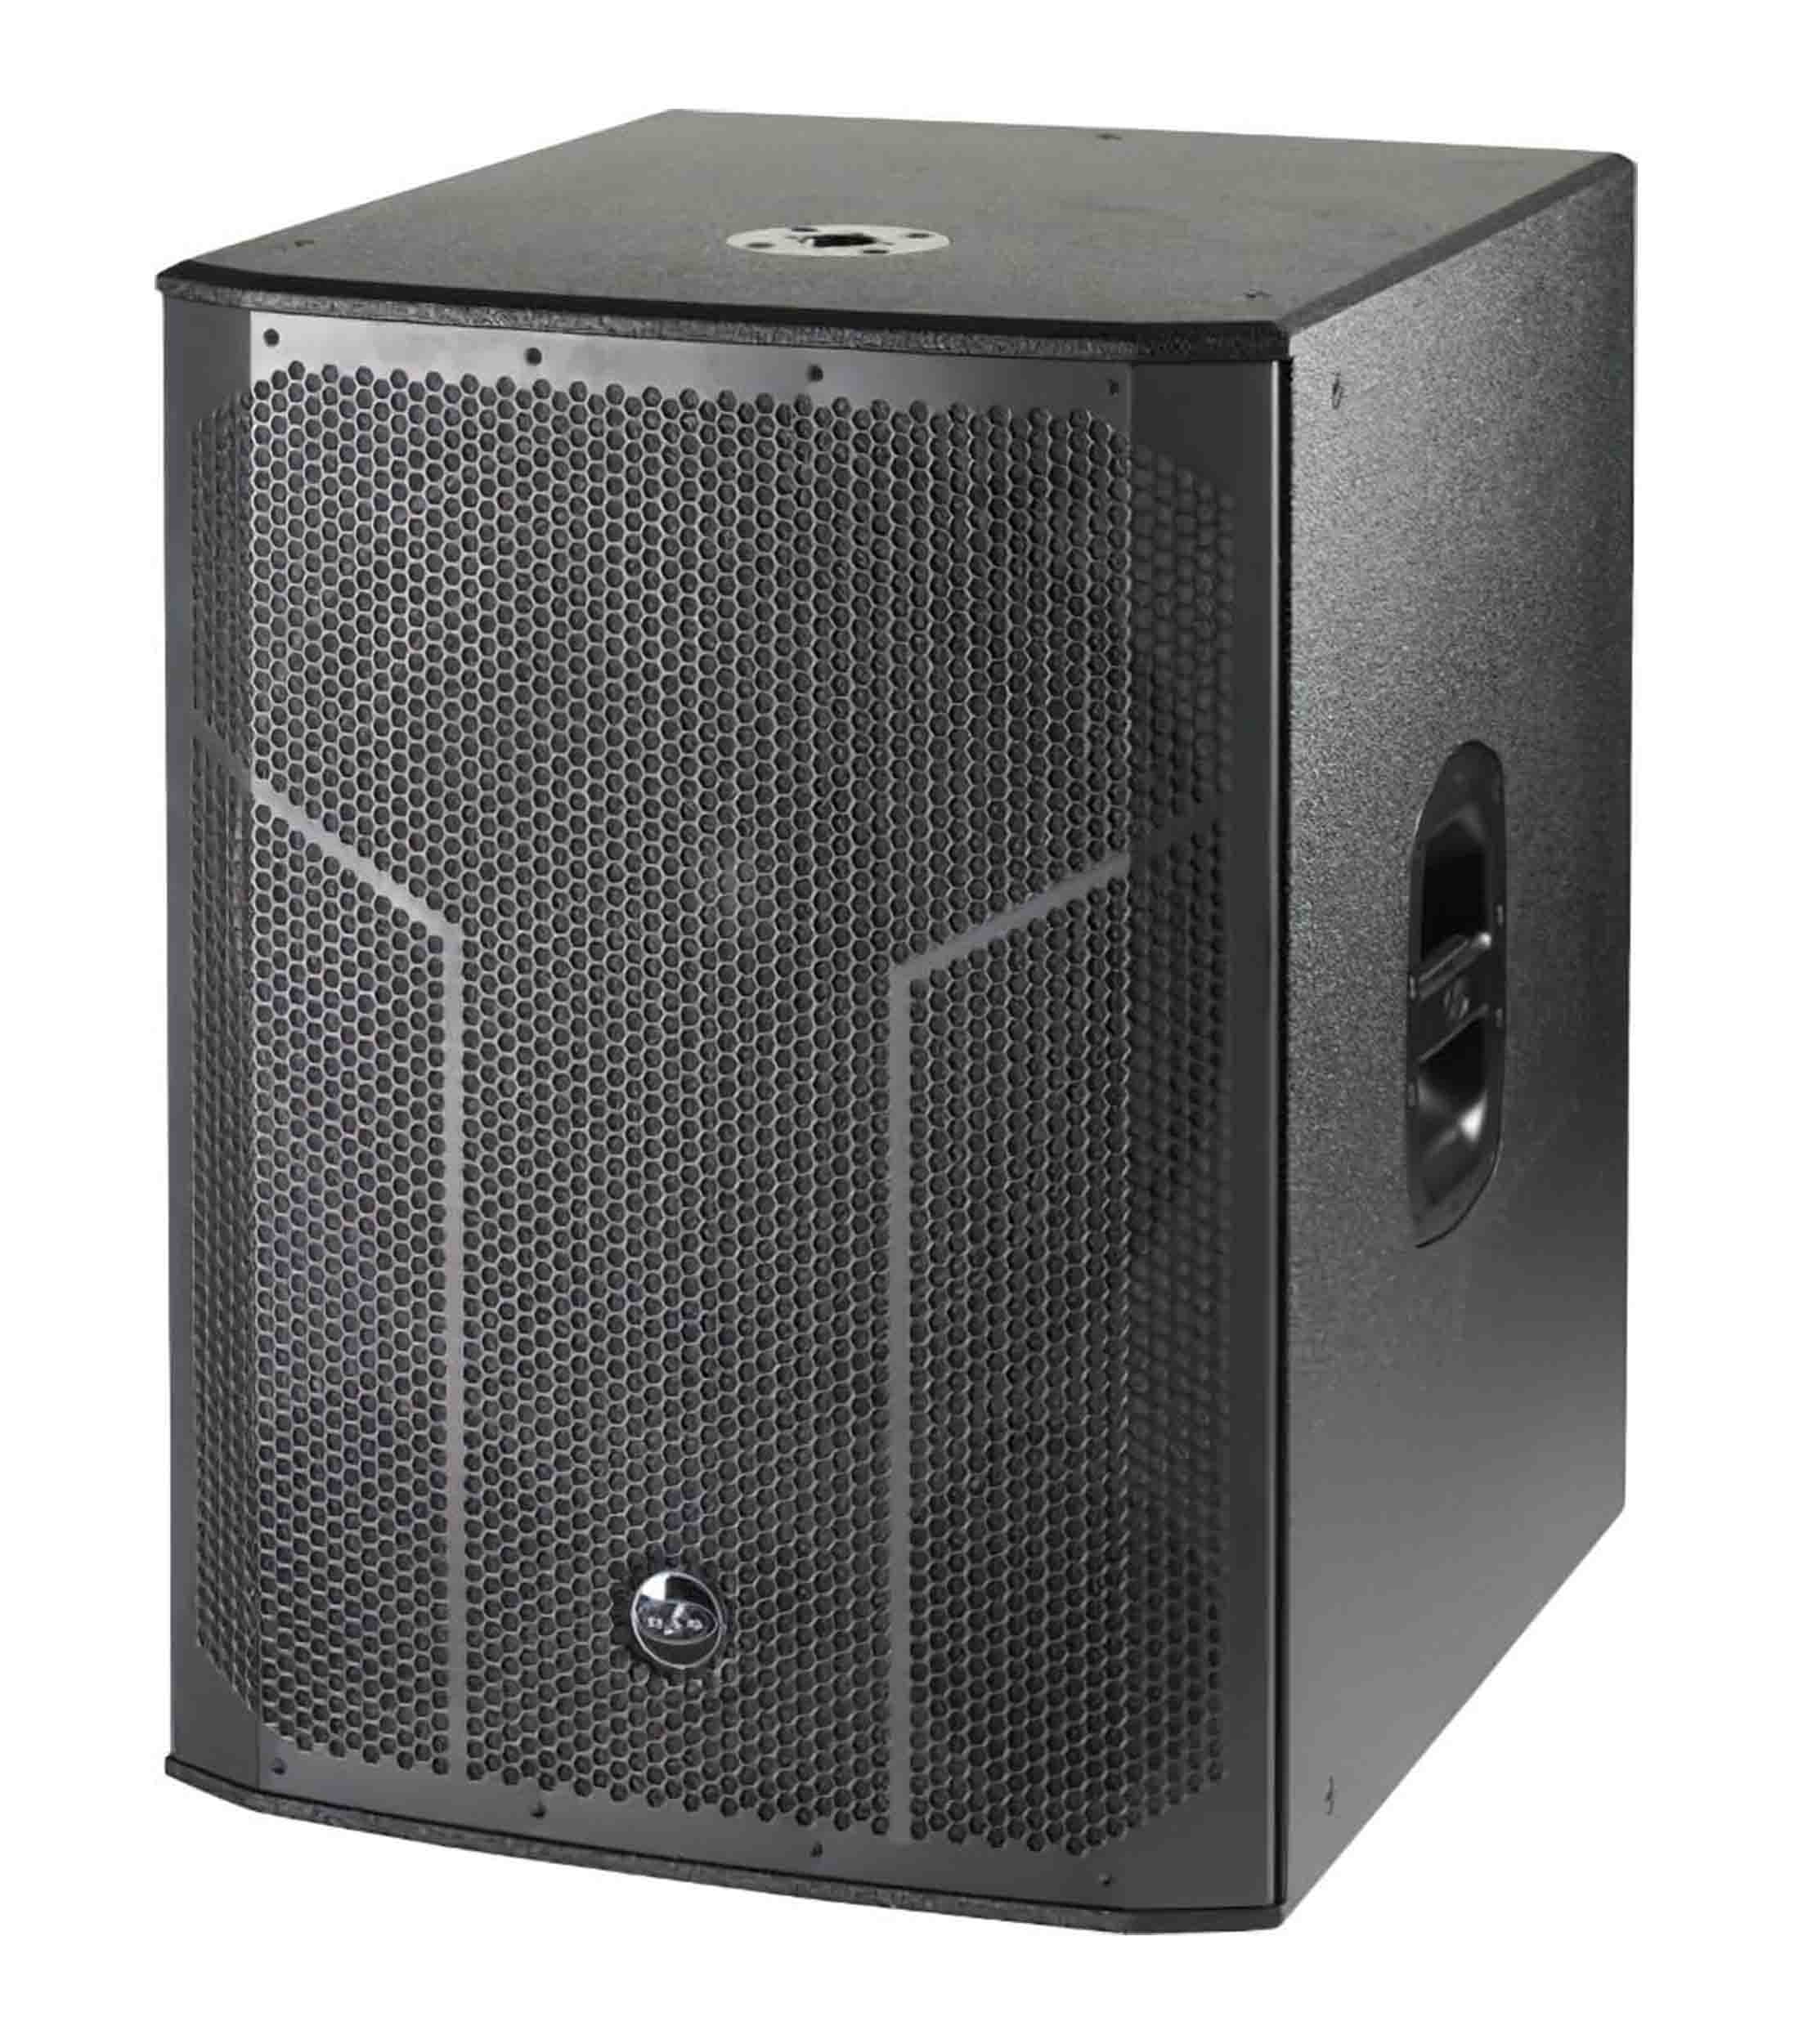 DAS Audio ACTION-S18A, 18-Inch 1500W Powered Portable Subwoofer with DSP Processor - Black by DAS Audio